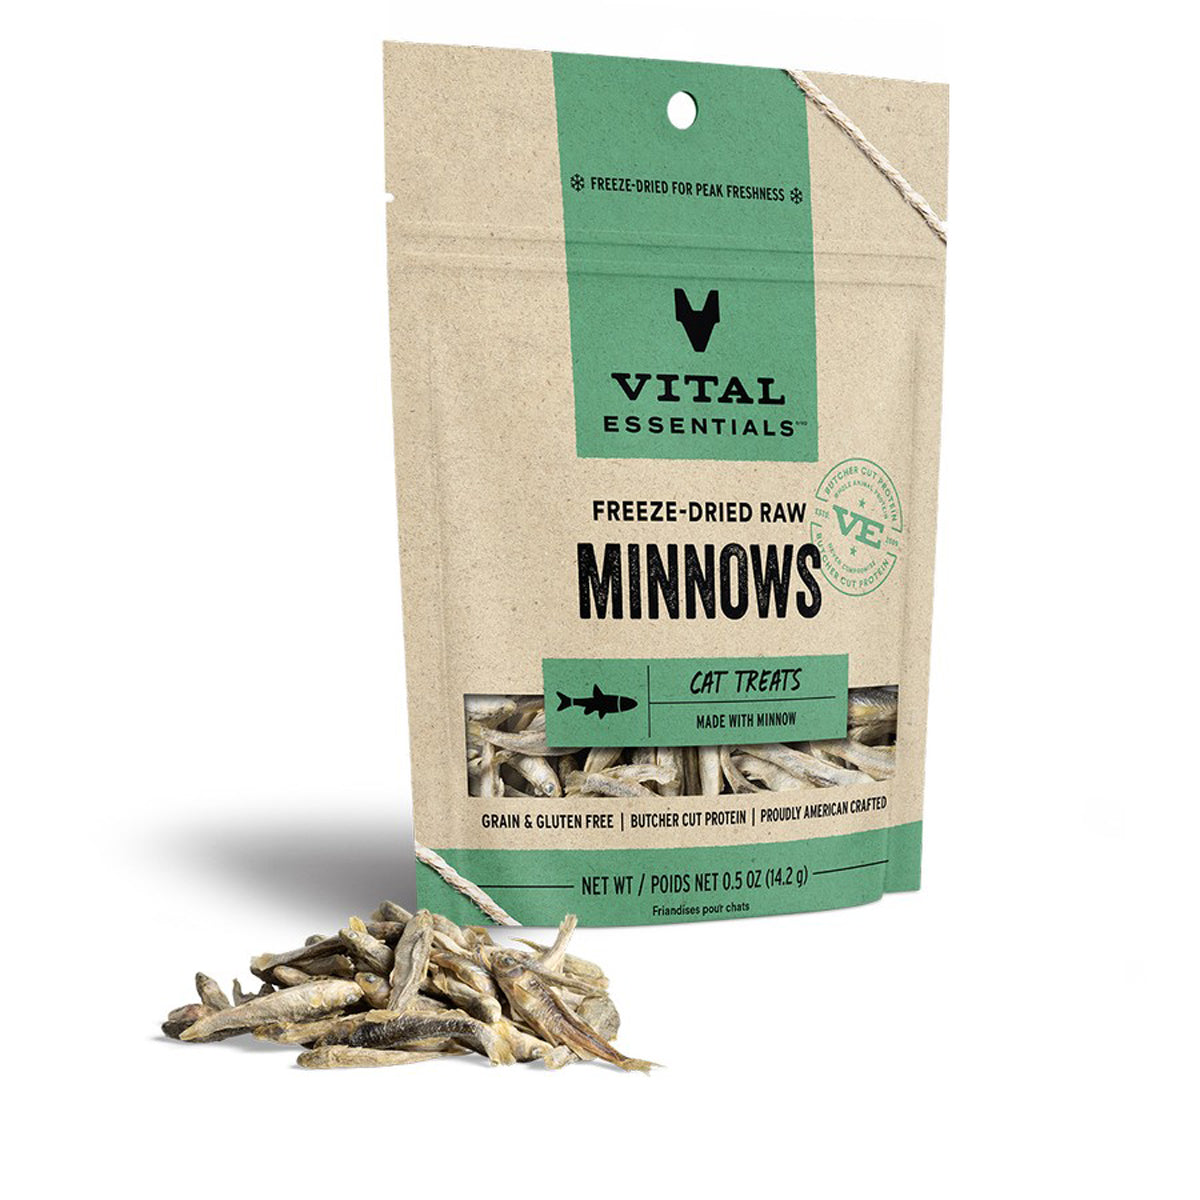  Vital Cat Vital Essentials Minnows Freeze-Dried Cat Treats -  All Natural Raw Treat - Made & Sourced in USA - Grain Free - 0.5 oz  Resealable Pouch - 3 Pack : Pet Supplies